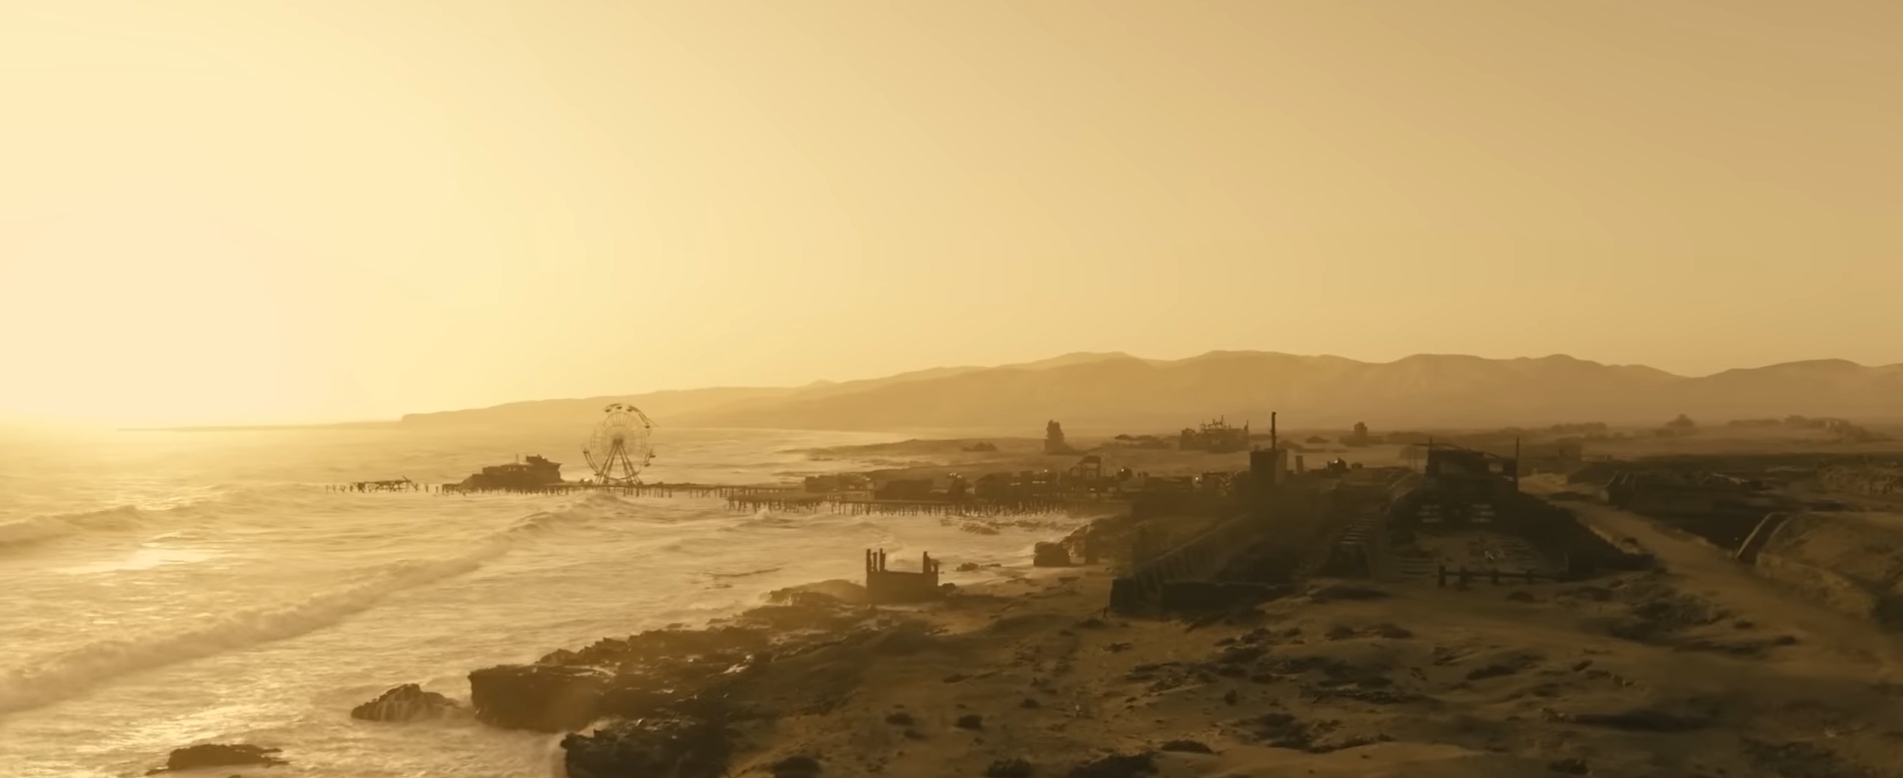 A still from Fallout